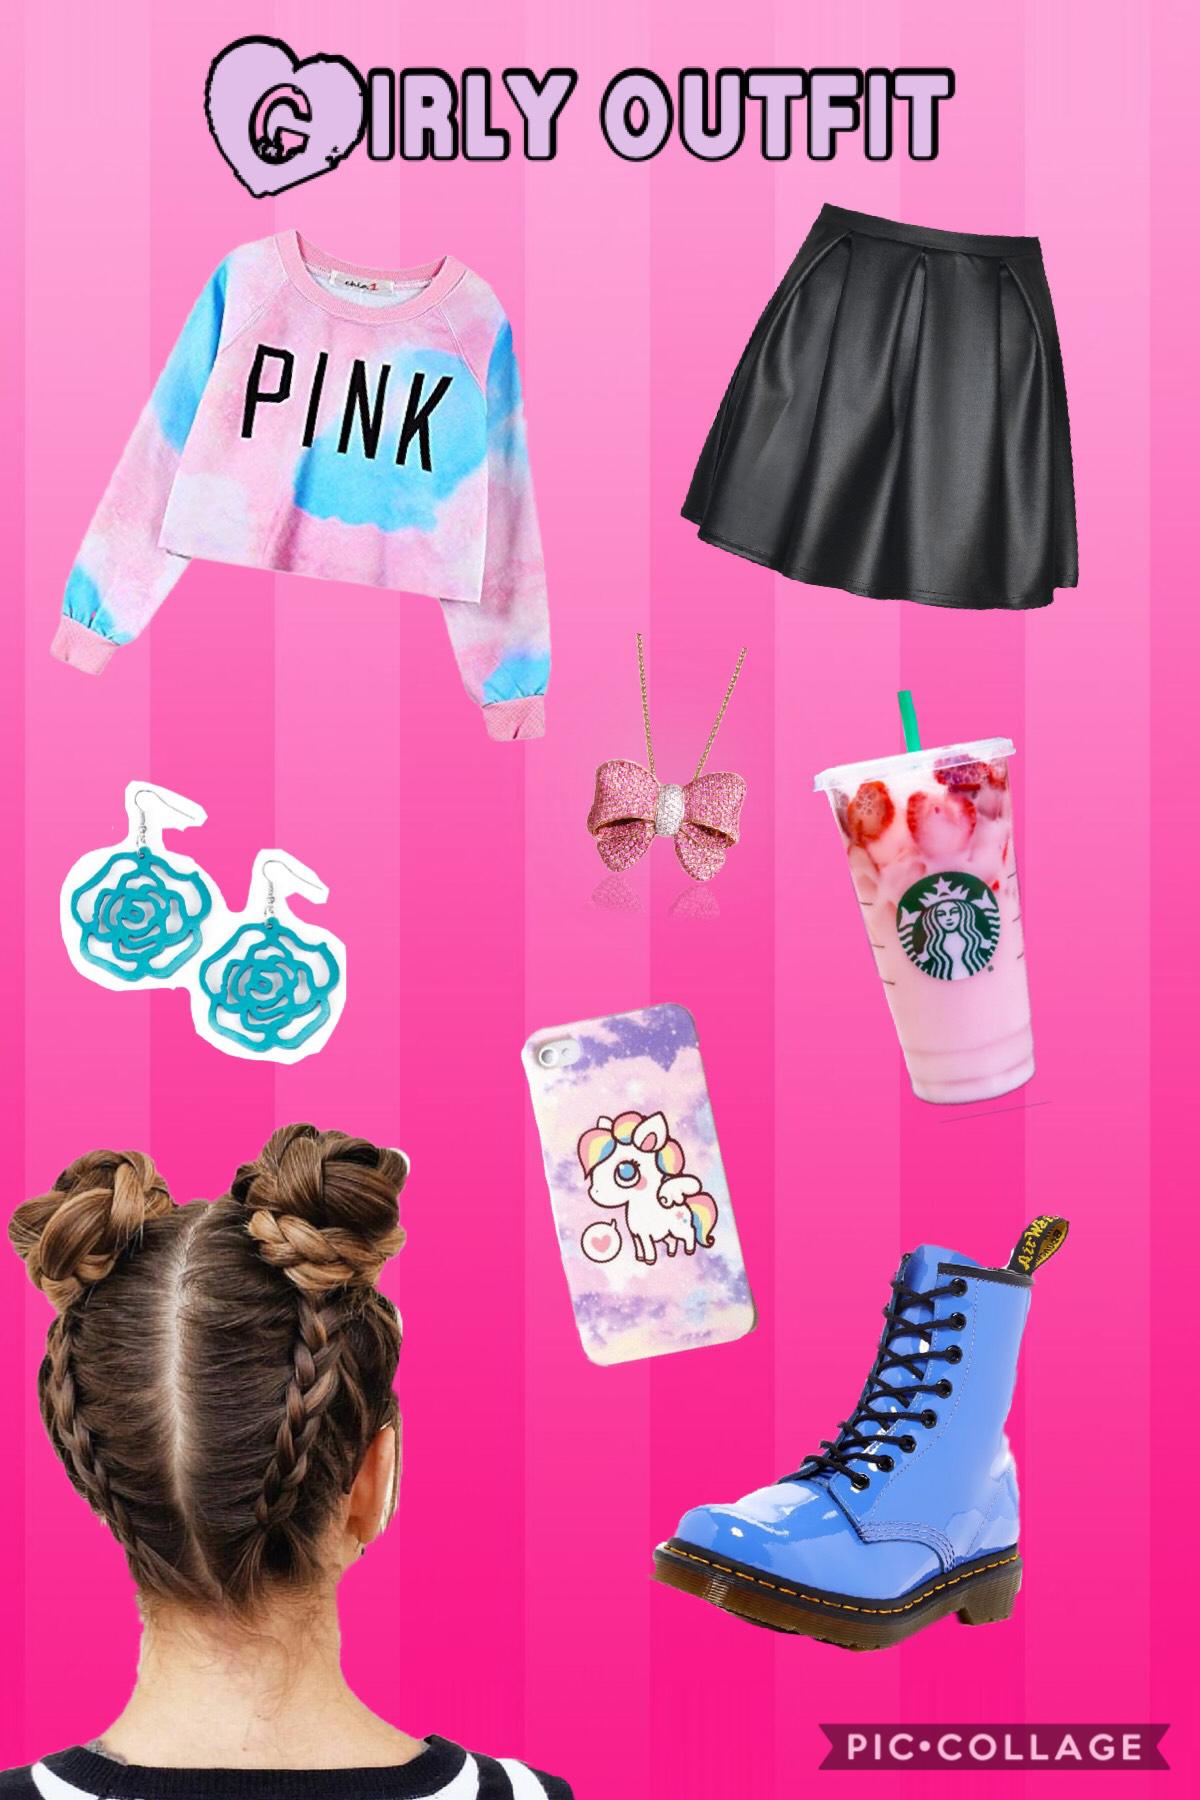 Girly outfit Tap
A pink cropped blue & pink shirt
Black leather skirt
Bow necklace
Pink drink
Blue rose earrings 
Unicorn phone case
Space buns
Blue boots